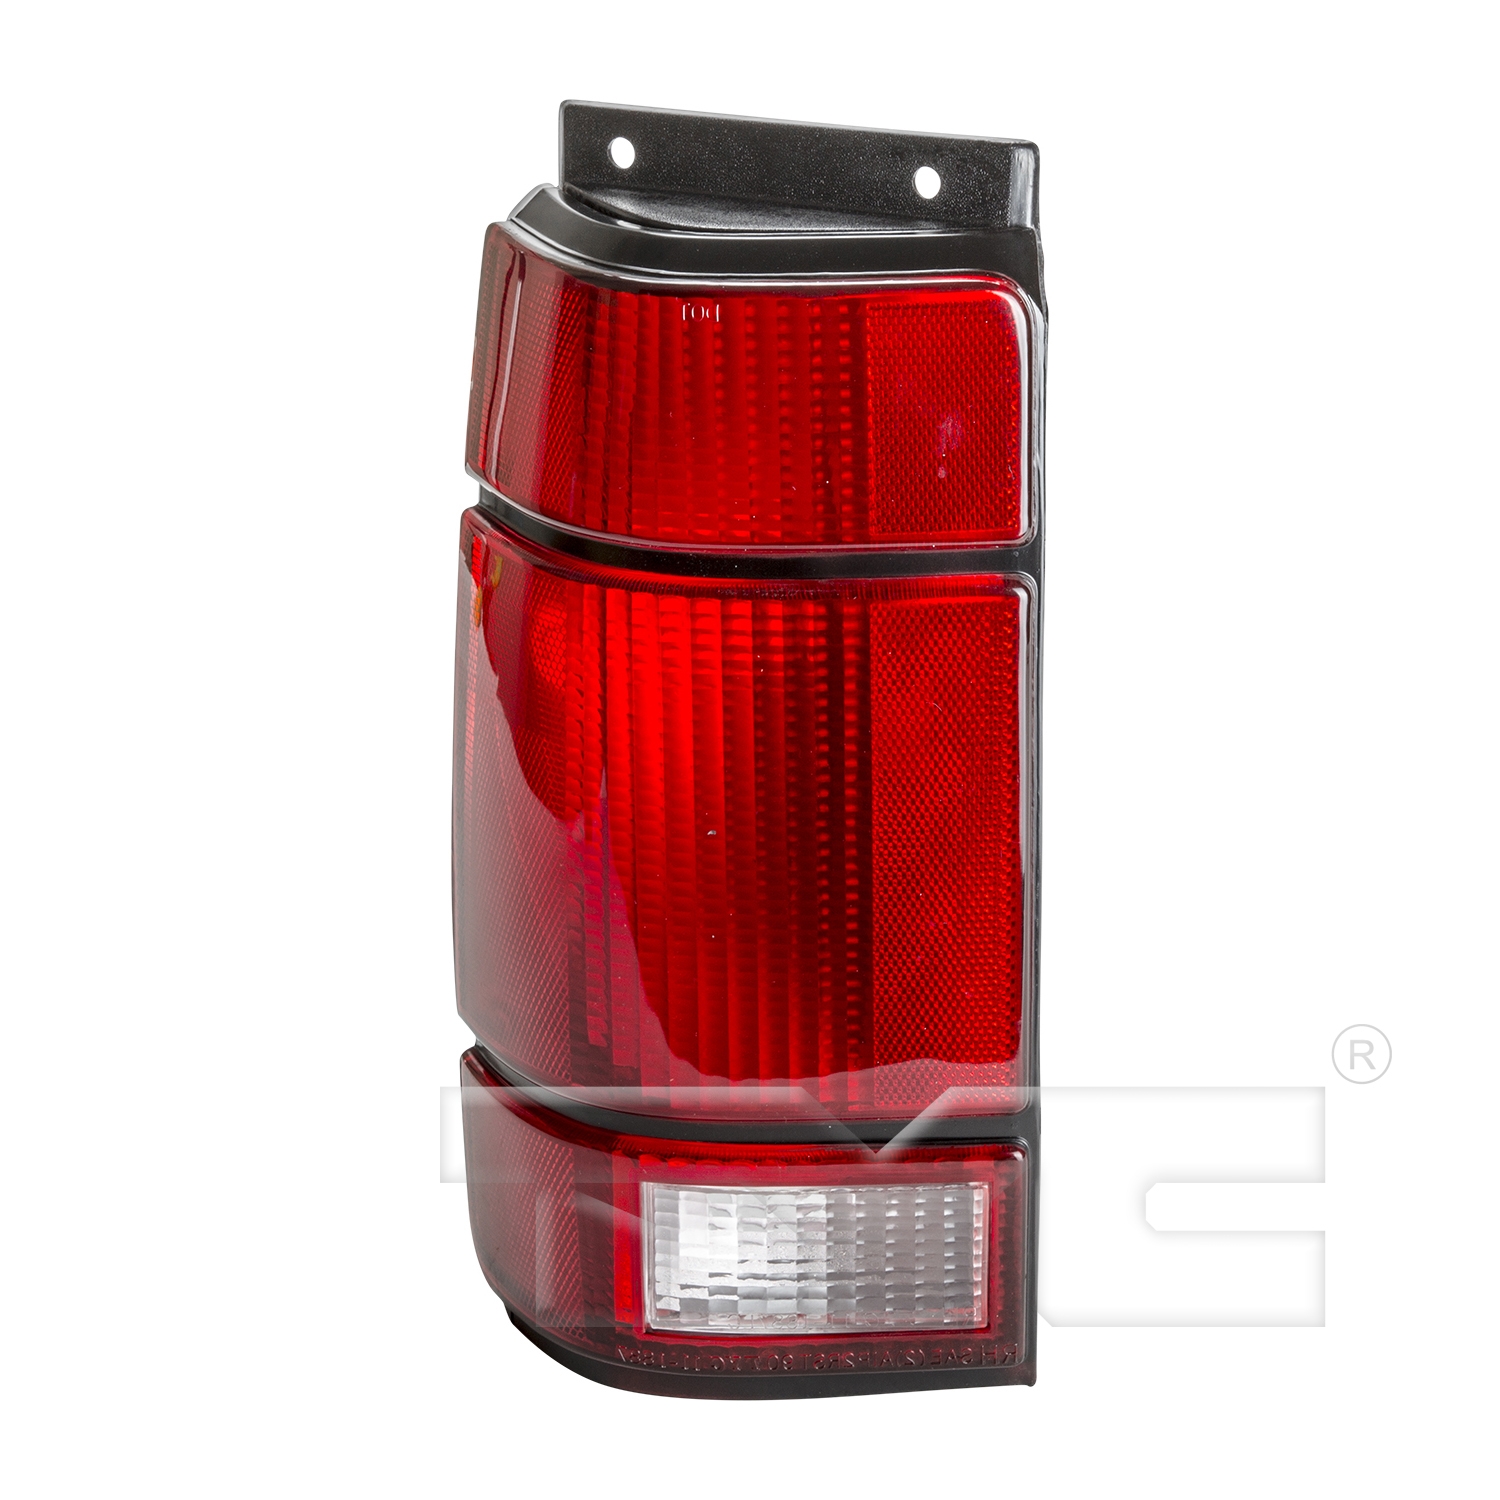 Aftermarket TAILLIGHTS for FORD - EXPLORER, EXPLORER,91-94,LT Taillamp assy